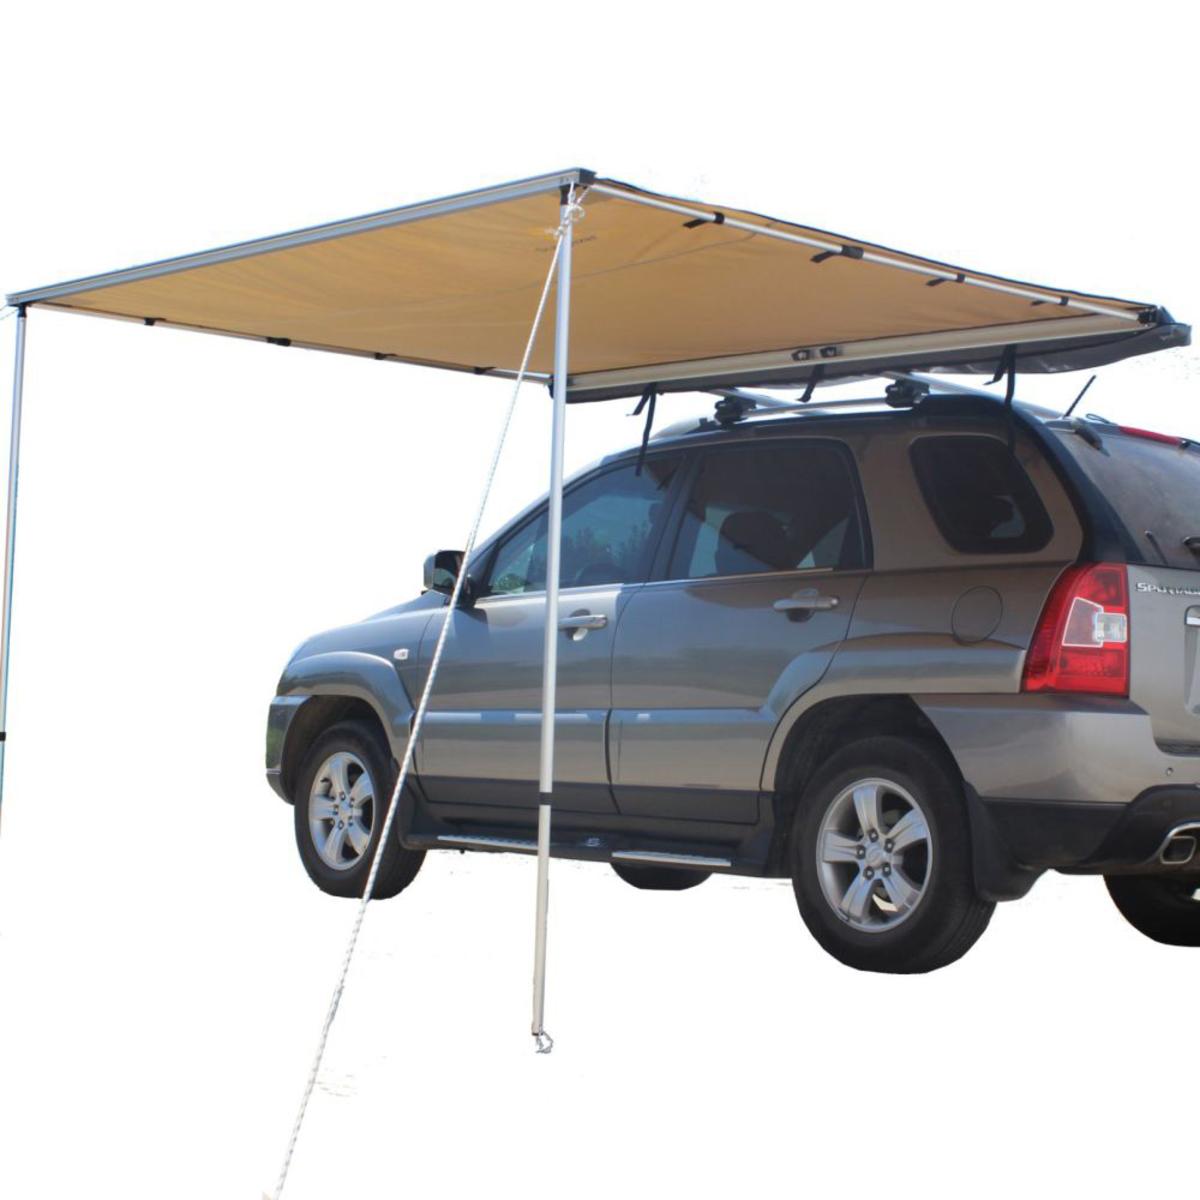 Trustmade 6' x 6' Car Side Awning Rooftop Pull Out Tent Shelter Black